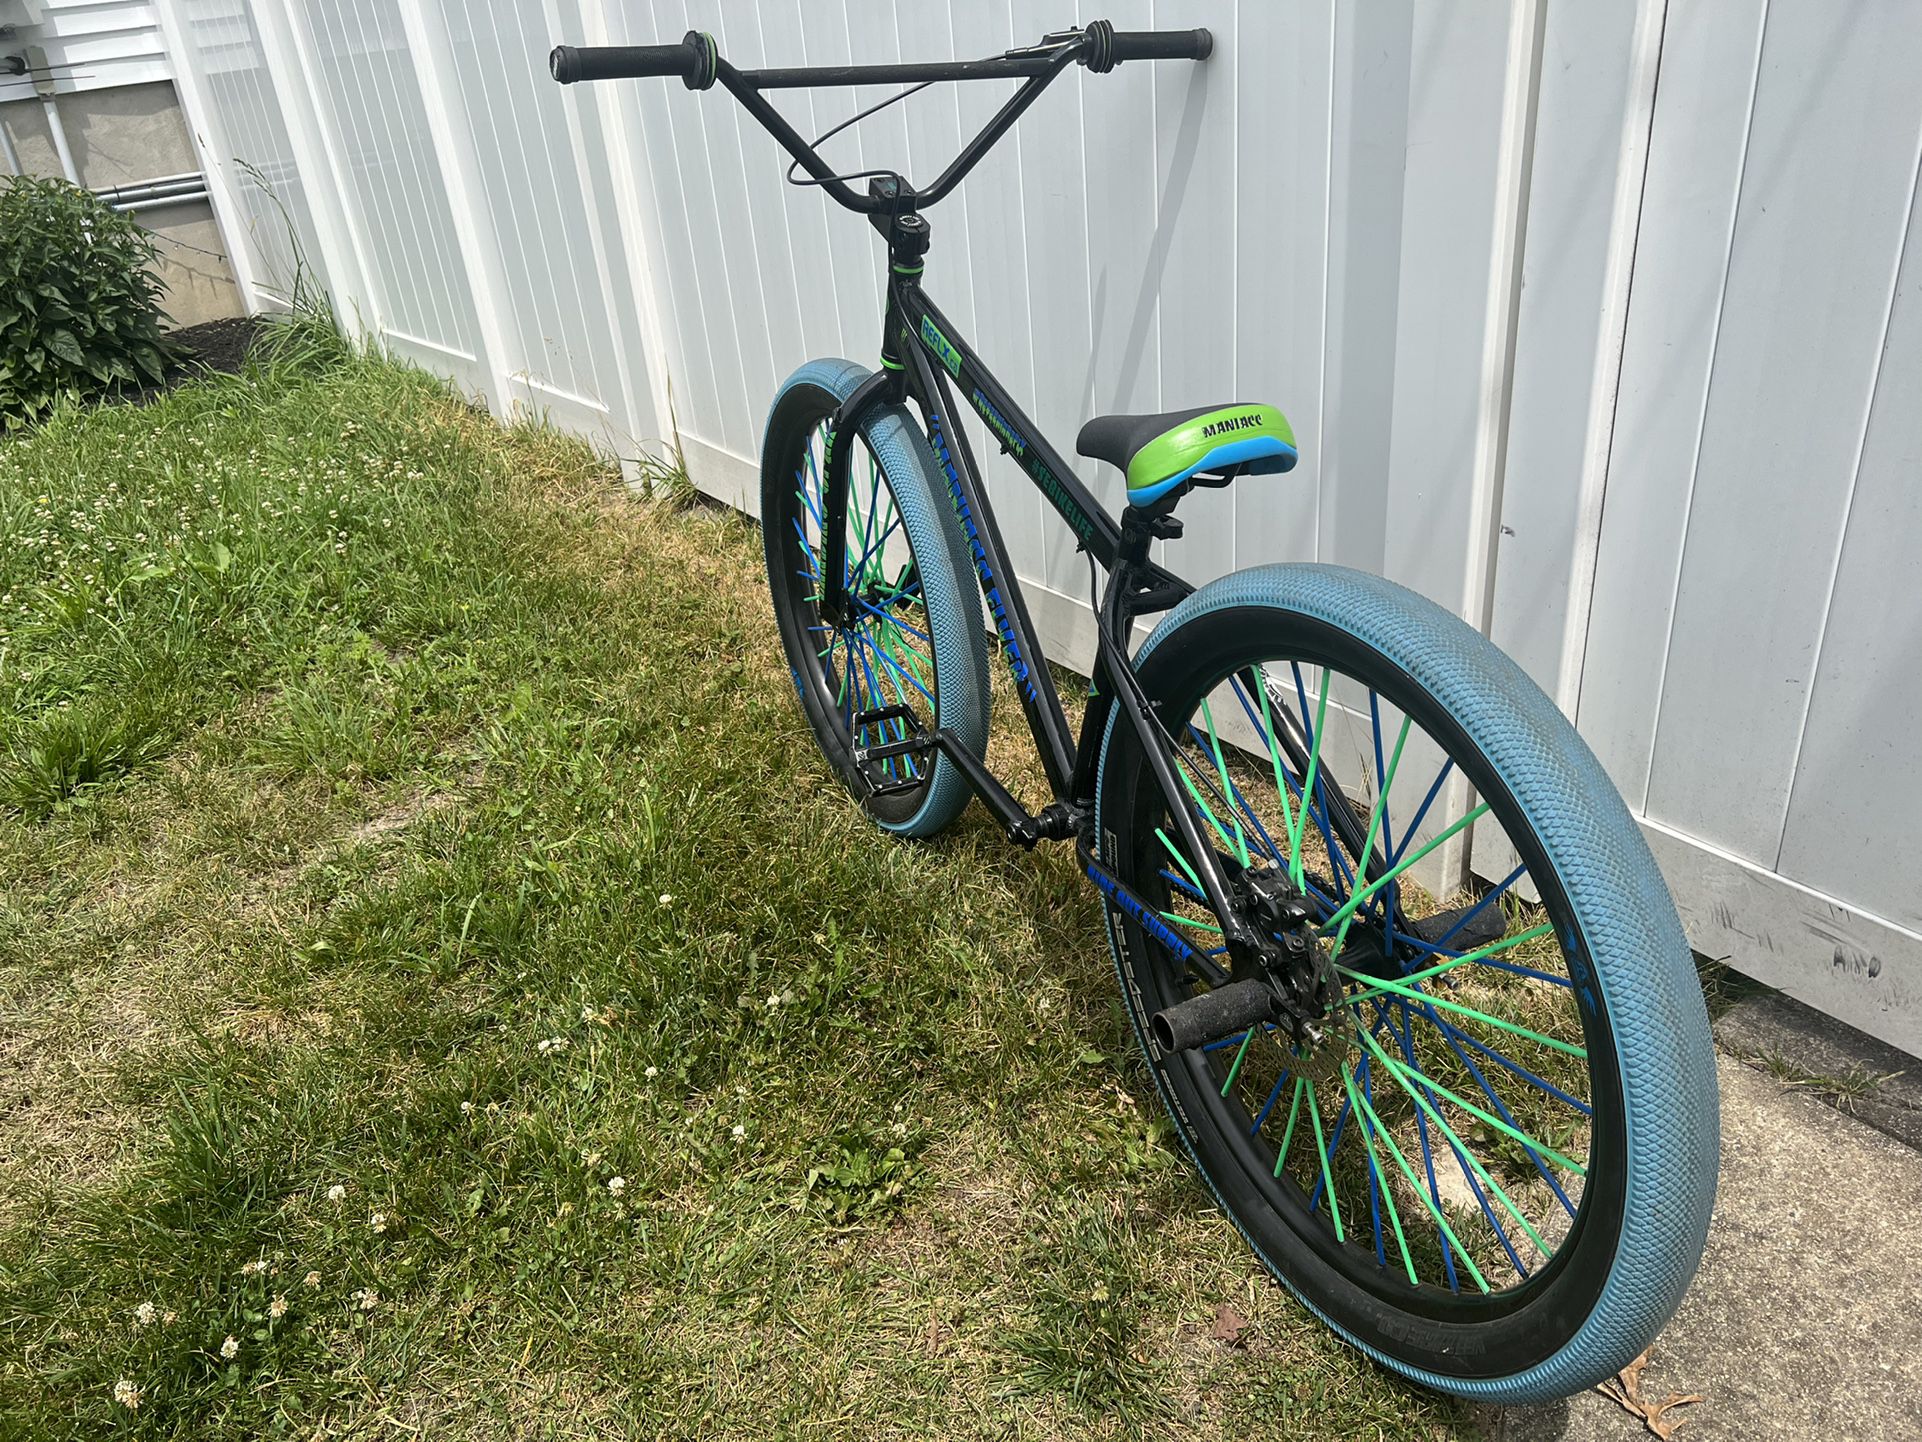 2019 Maniacc Flyer For Sale In Stafford Township Nj Offerup